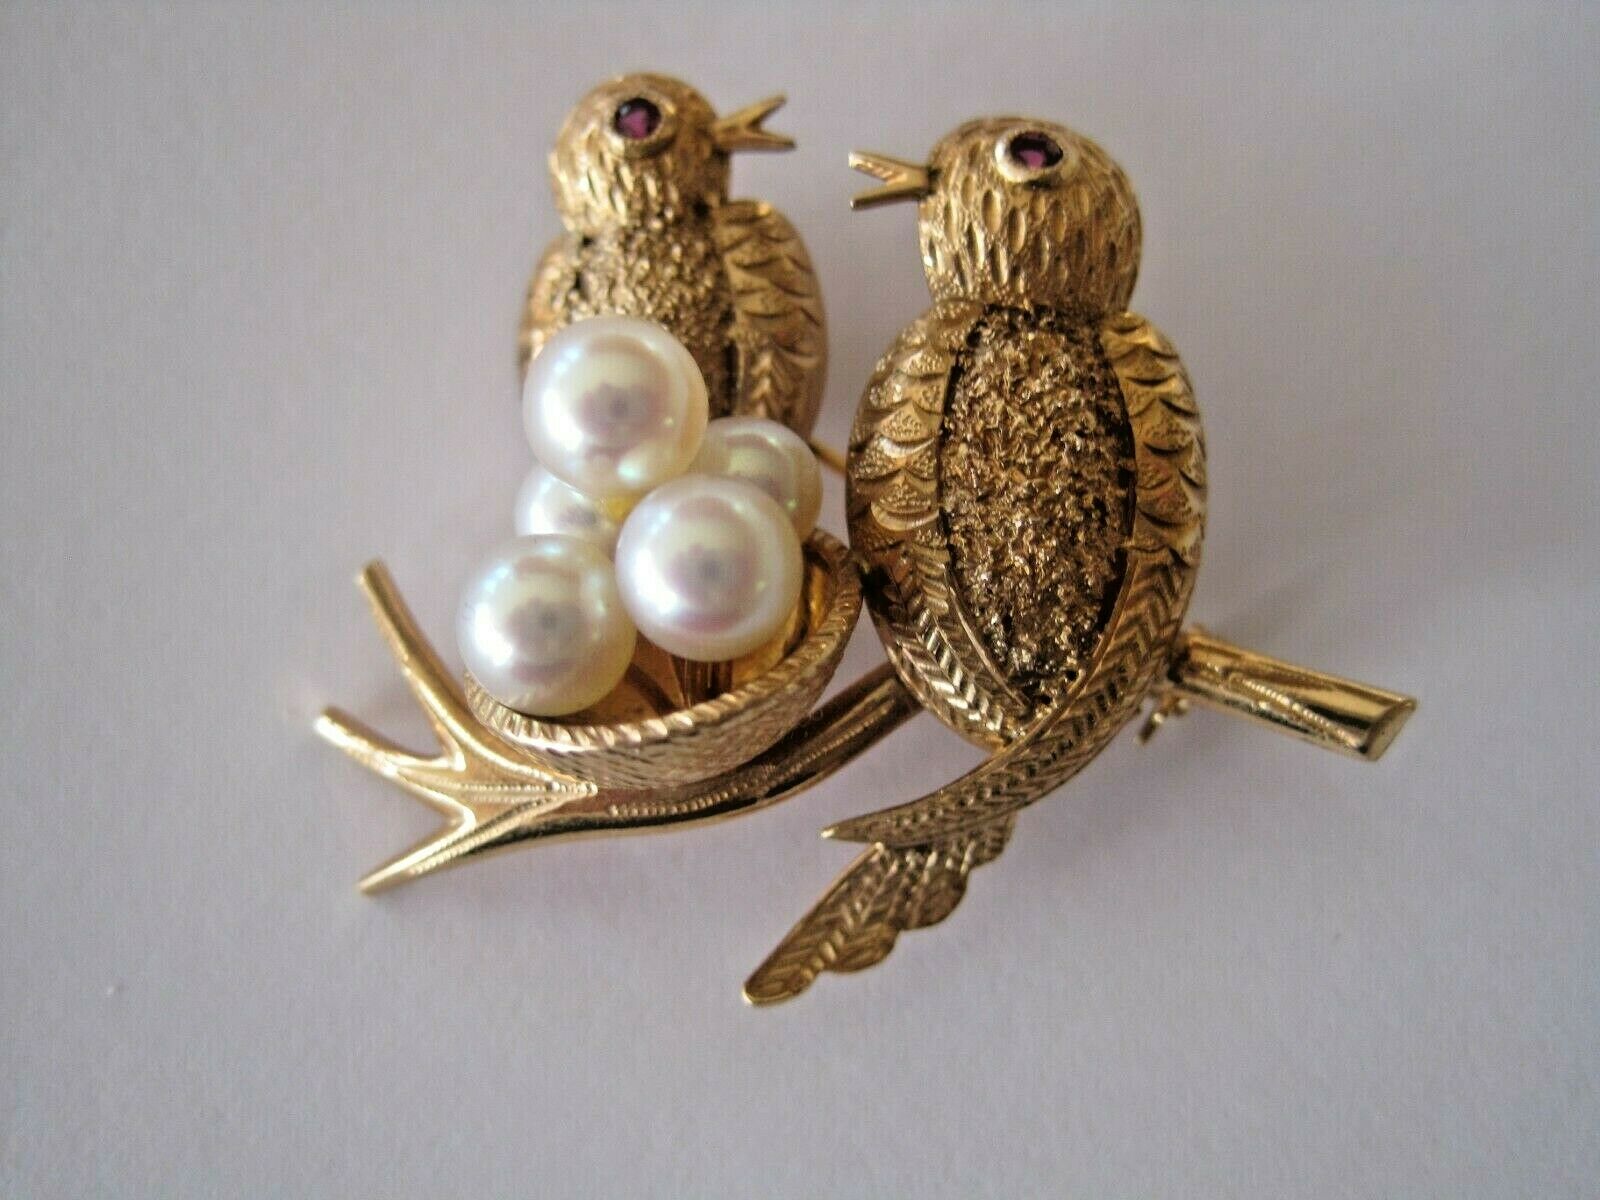 14k Yellow Gold & Ruby Eyed Birds On Branch With Pearl Eggs In Nest. Brooch Pin.